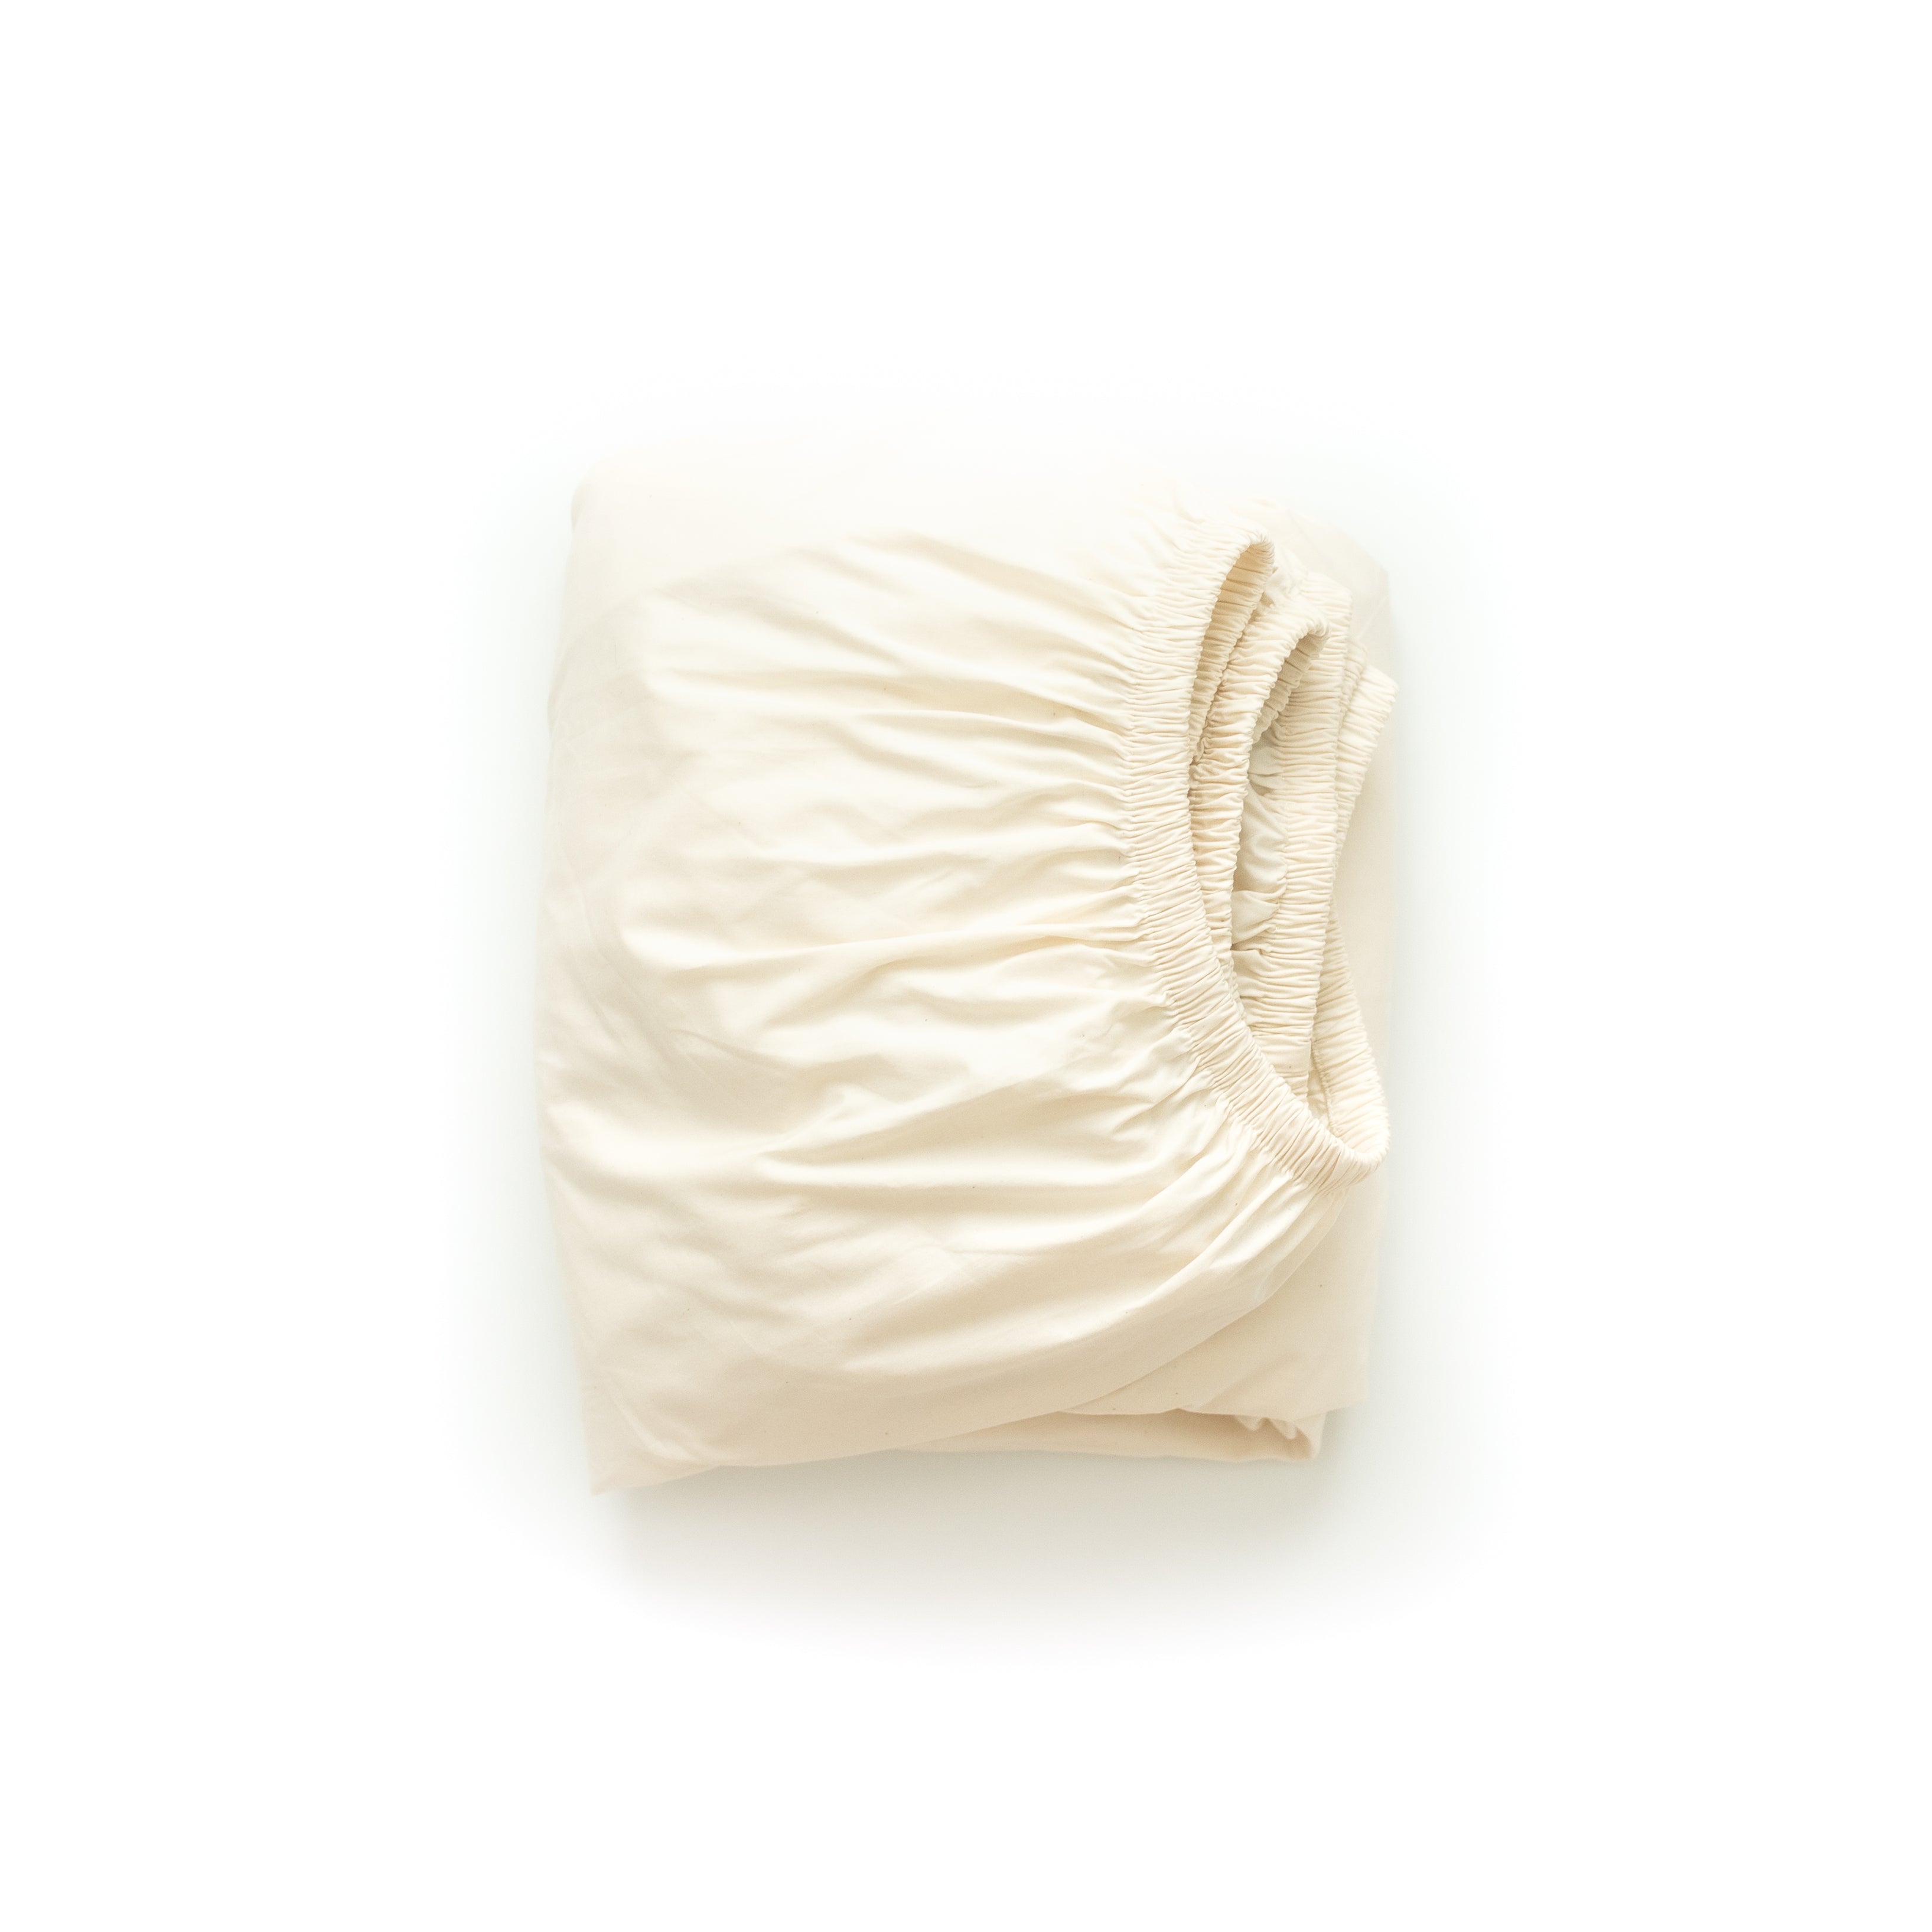 An Oolie organic cotton deep fitted sheet in natural, unbleached cotton, folded flat on a white background.